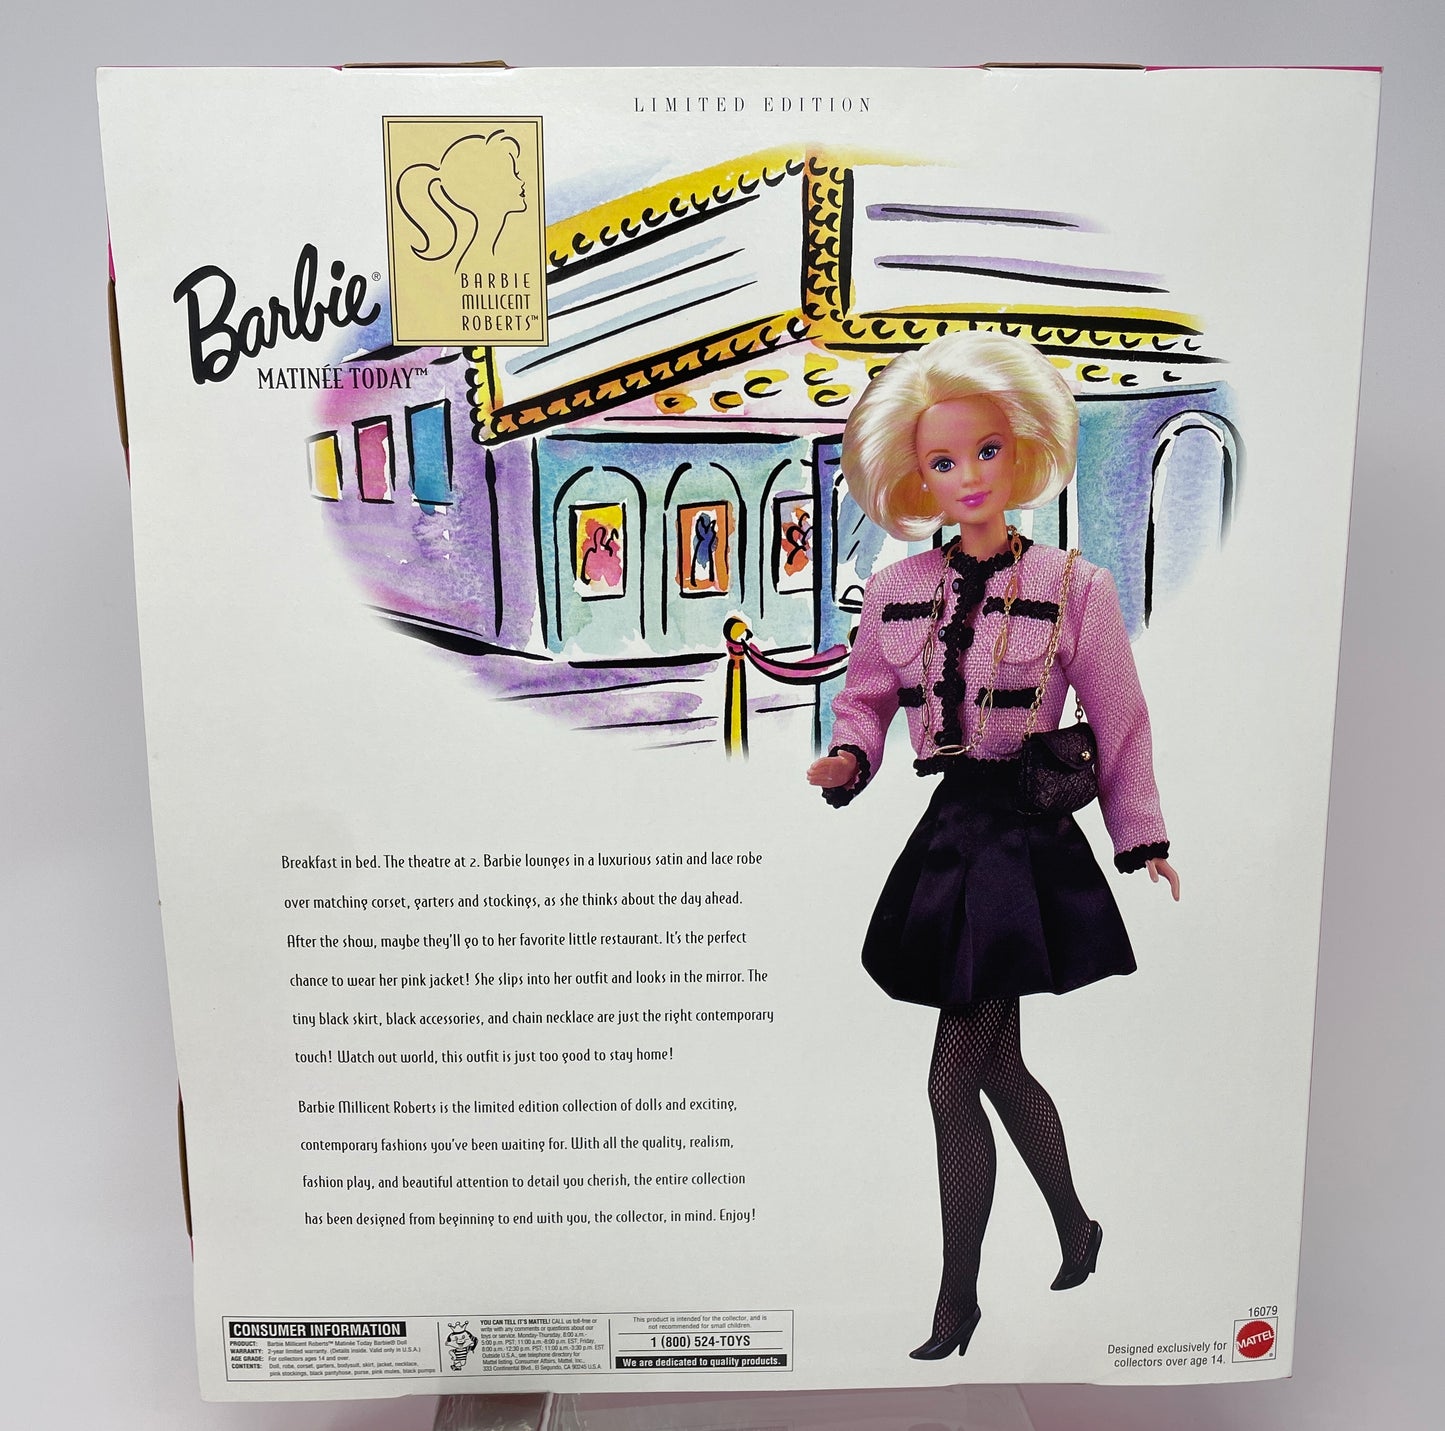 BARBIE MATINEE TODAY - BARBIE MILLICENT ROBERTS COLLECTION - LIMITED EDITION - #16079 - MATTEL 1996